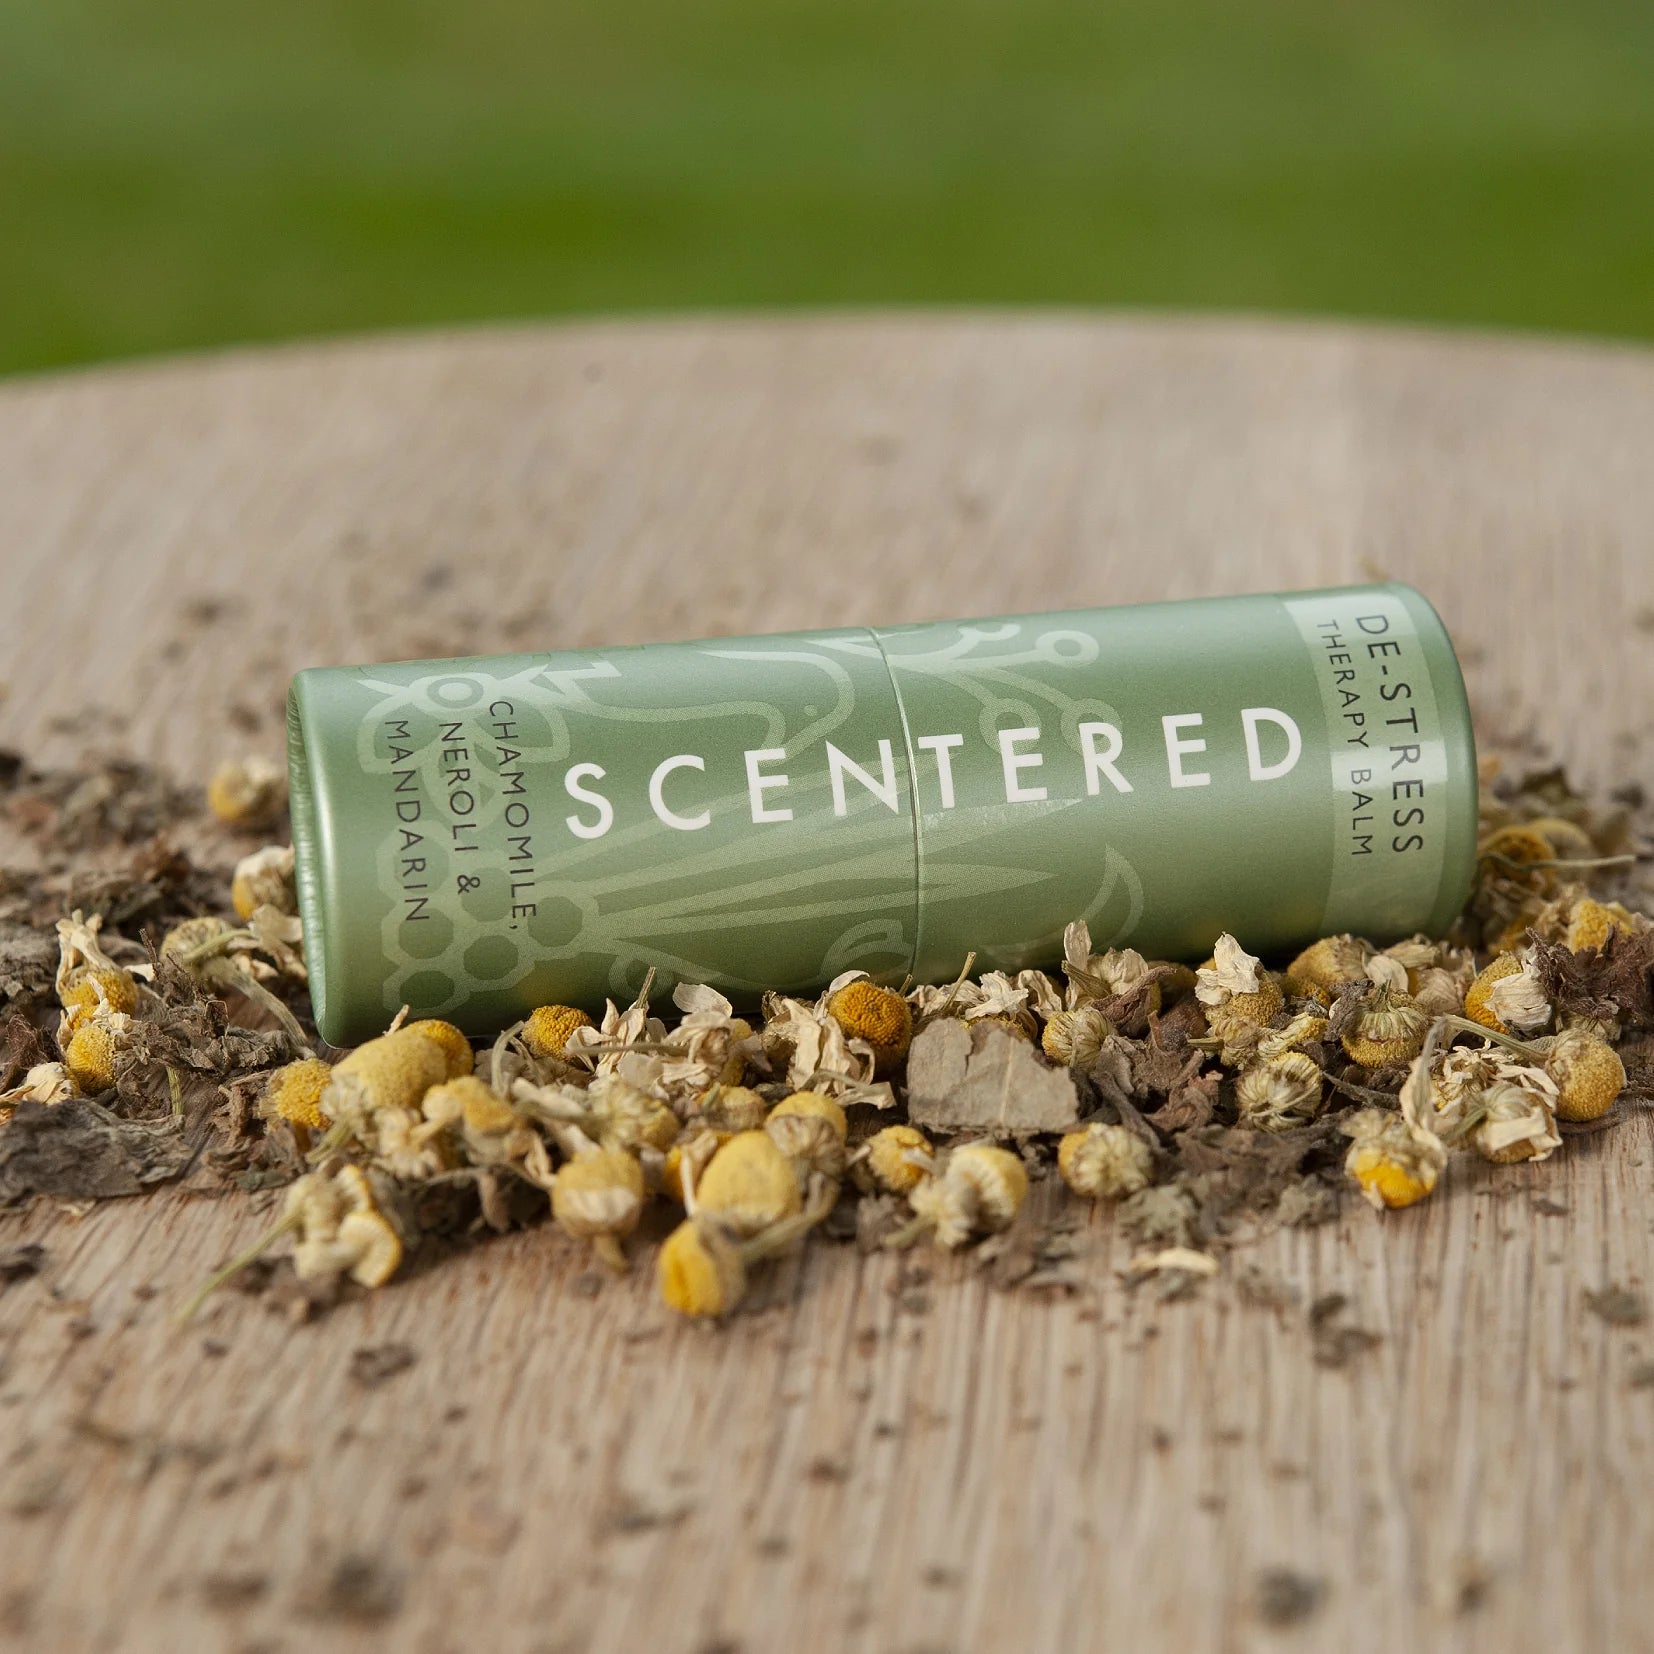 This is a picture of a Scentered De-stress Aromatherapy Balm, full size 5g, lying on its side on a table surrounded by the ingredients that are included in the balm, especially chamomile